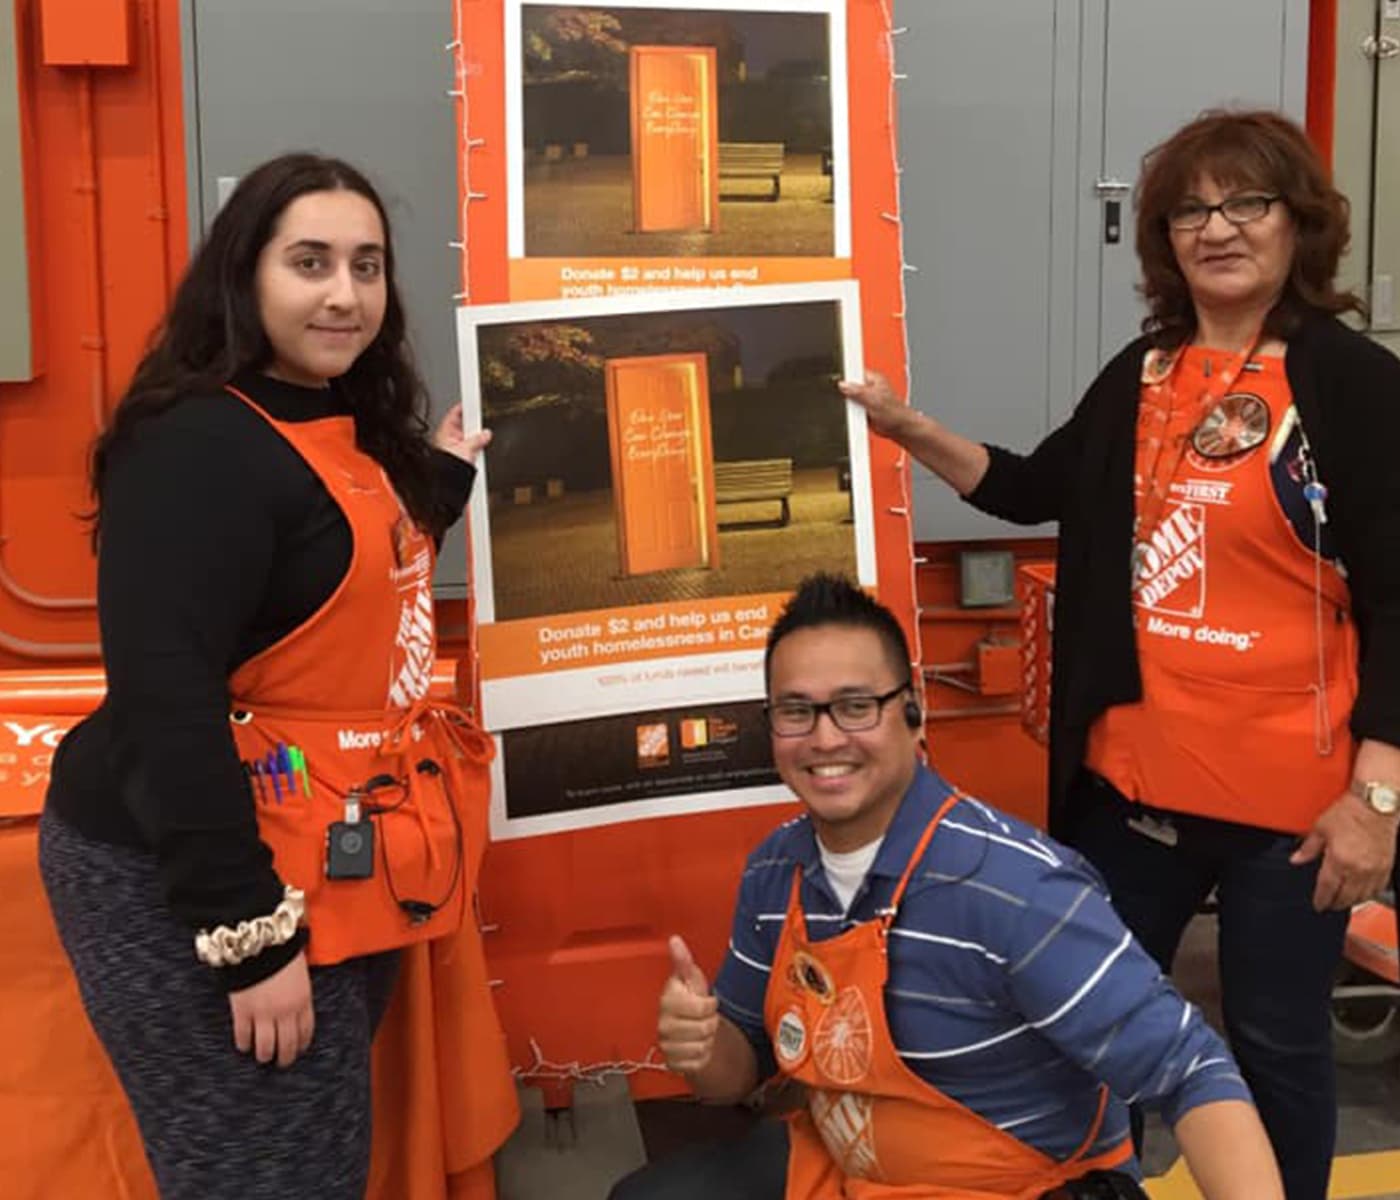 Three people form Home Depot helping out with a fundraiser